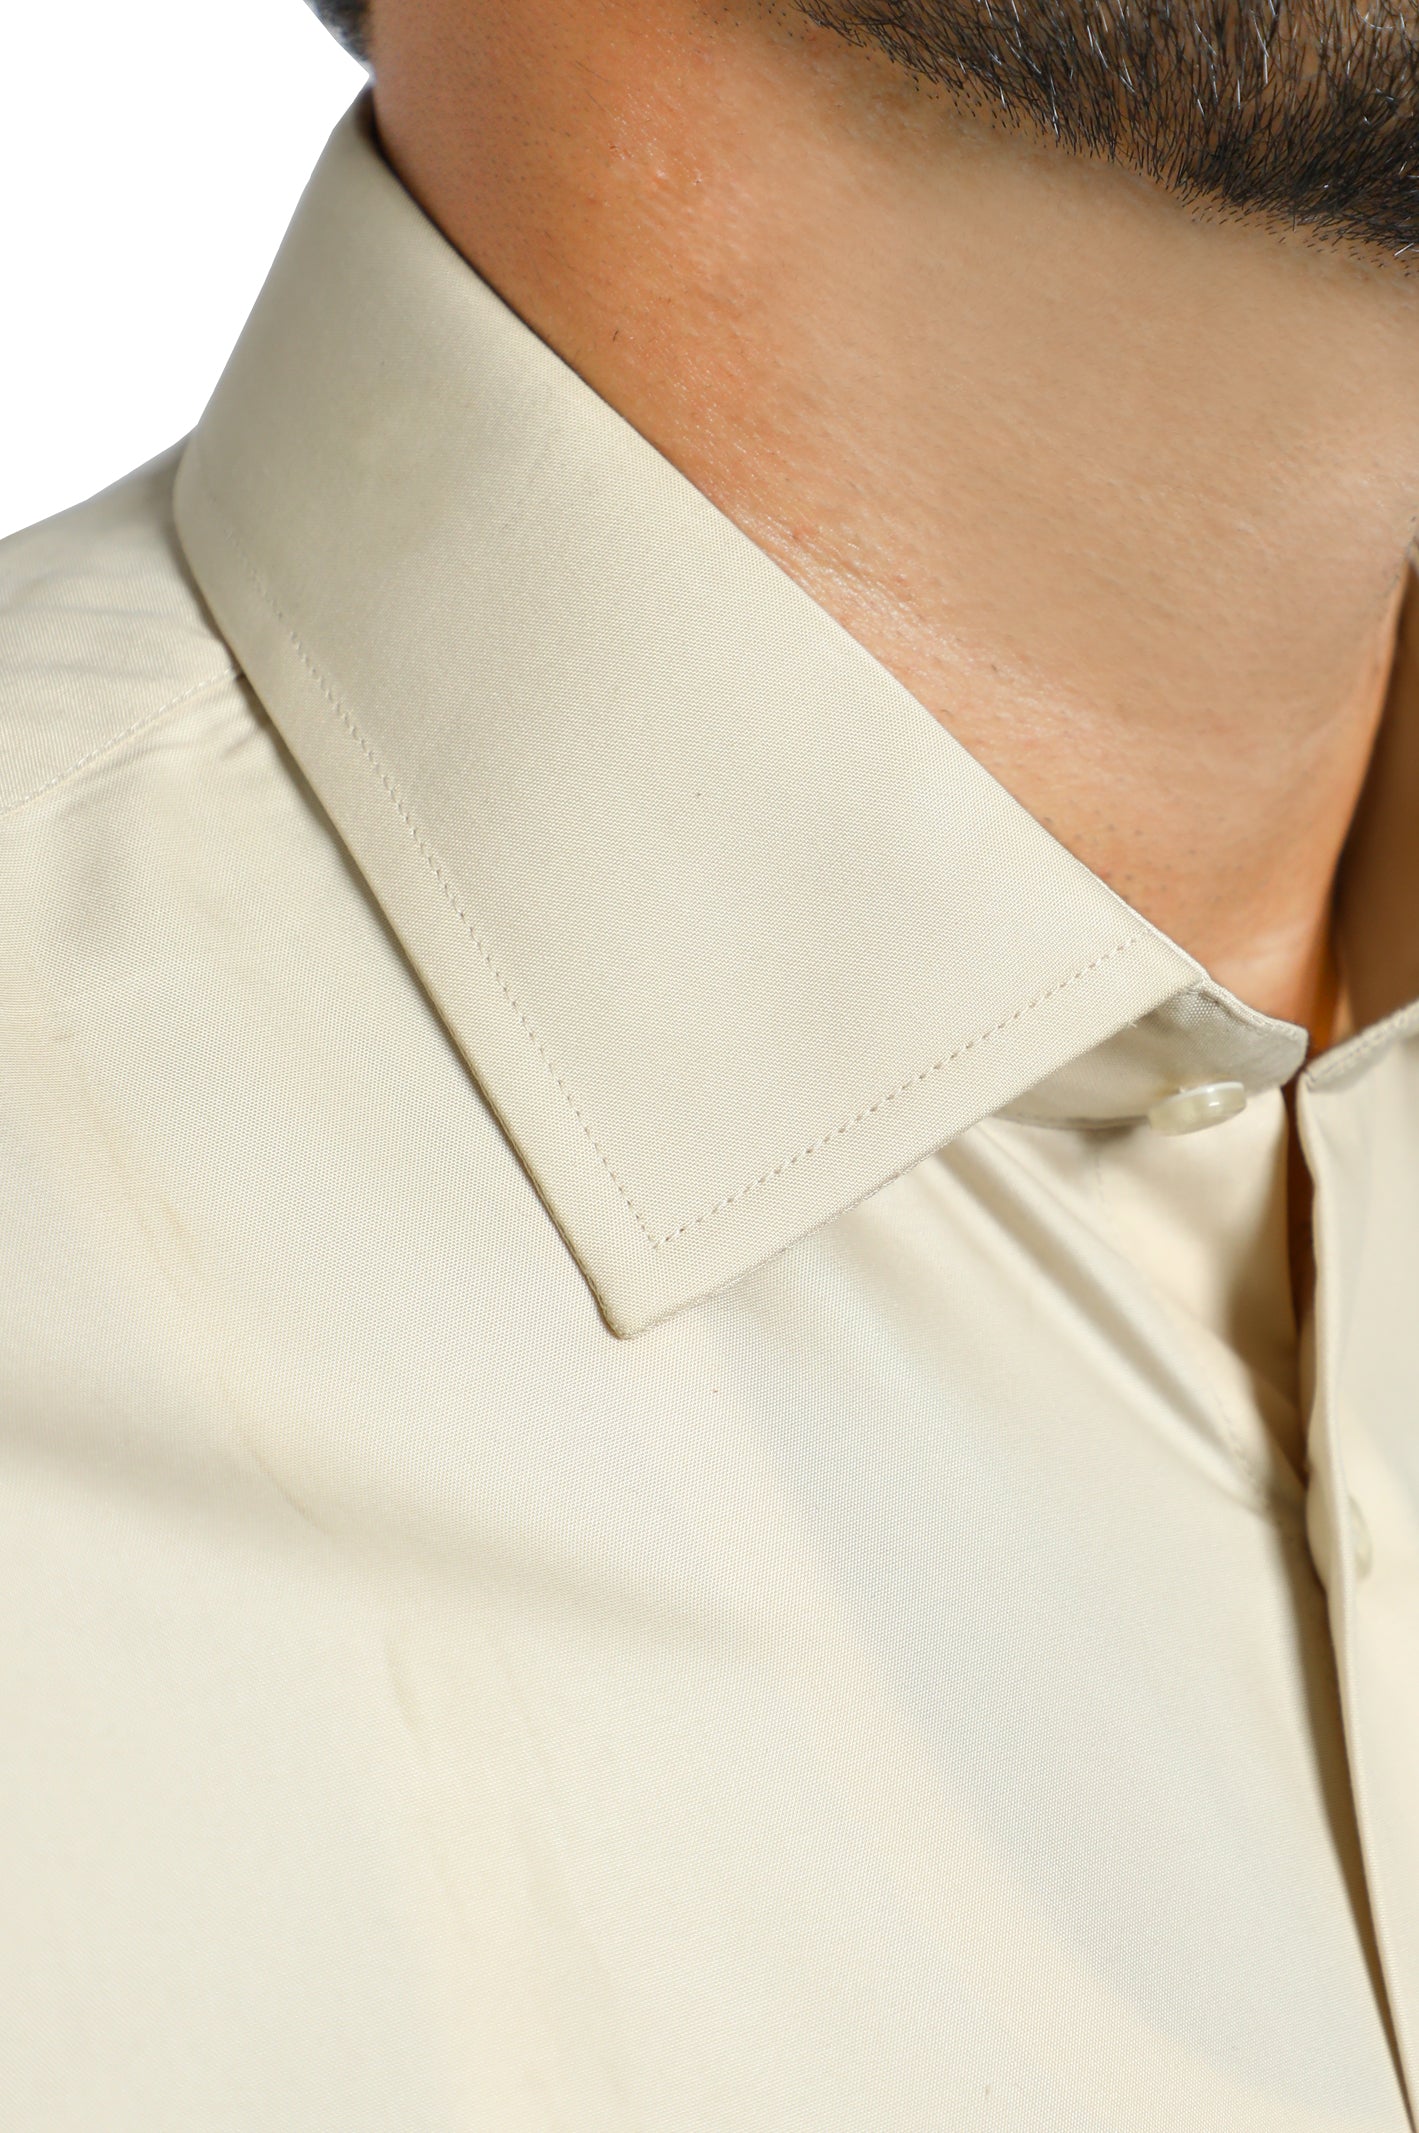 Formal Man Shirt in Fawn SKU: AB2271-Fawn - Diners